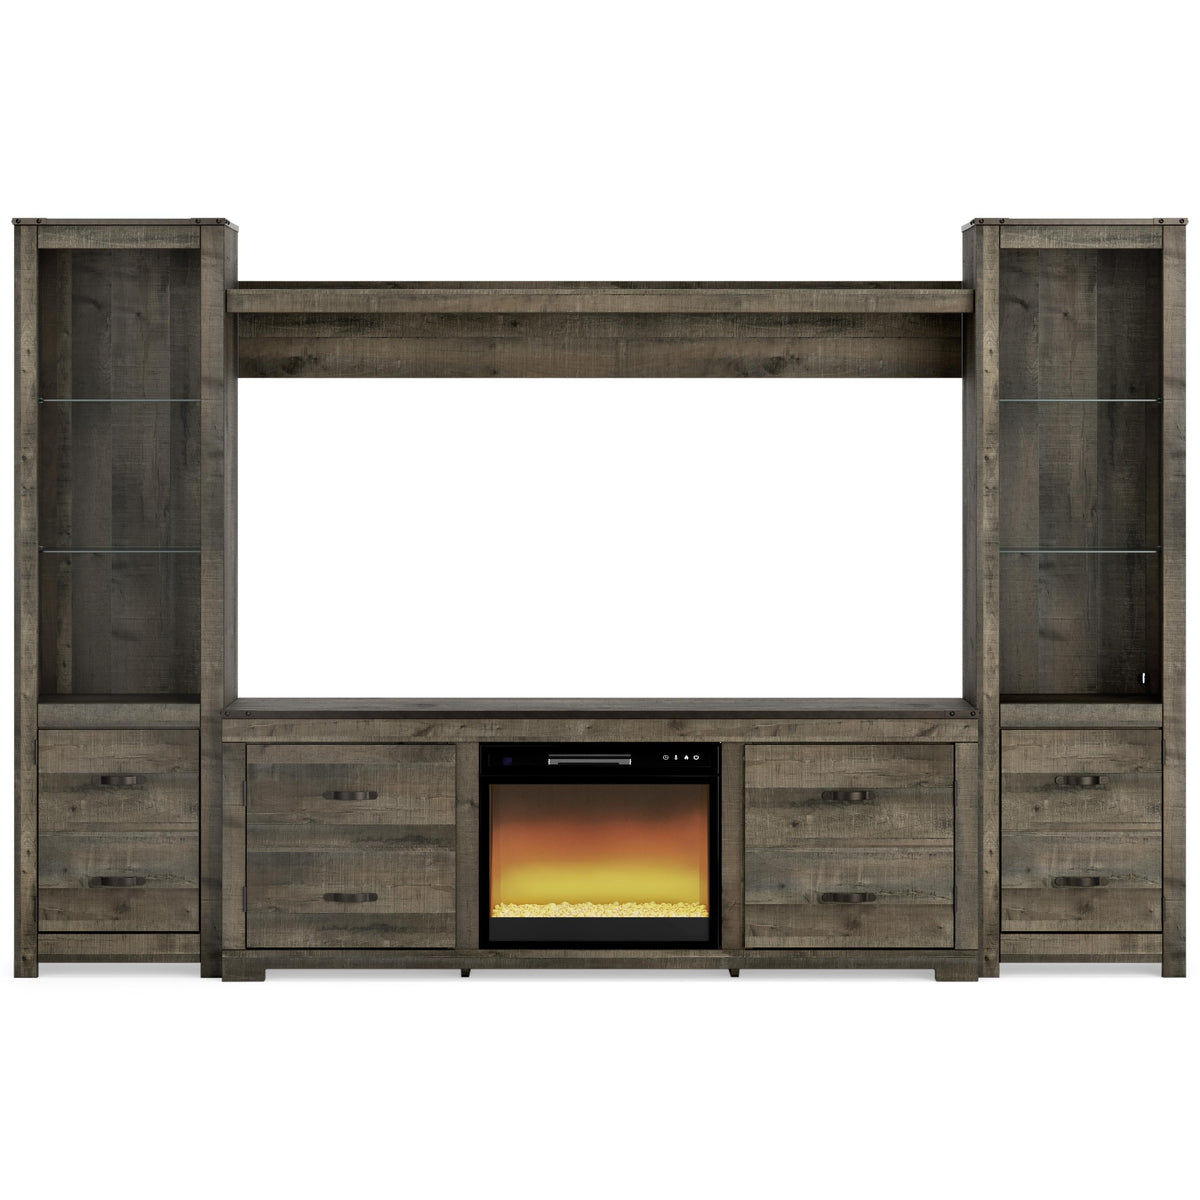 Signature Design by Ashley Trinell W446W15 4 pc Entertainment Center with Electric Fireplace